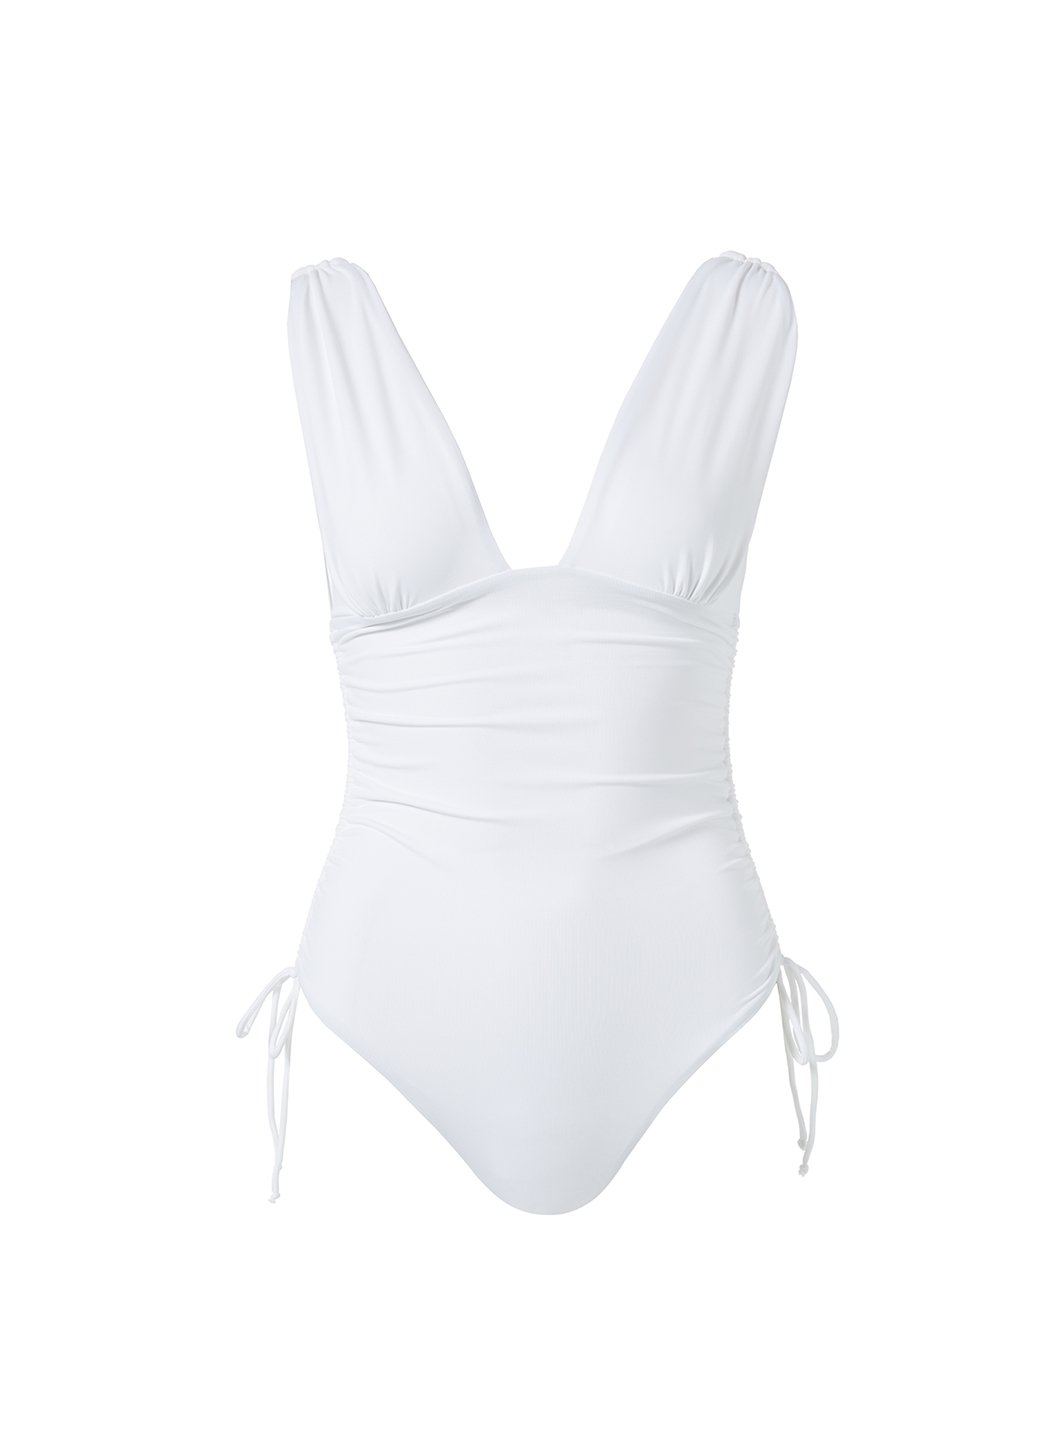 chile white adjustable ruched over the shoulder swimsuit Cutout